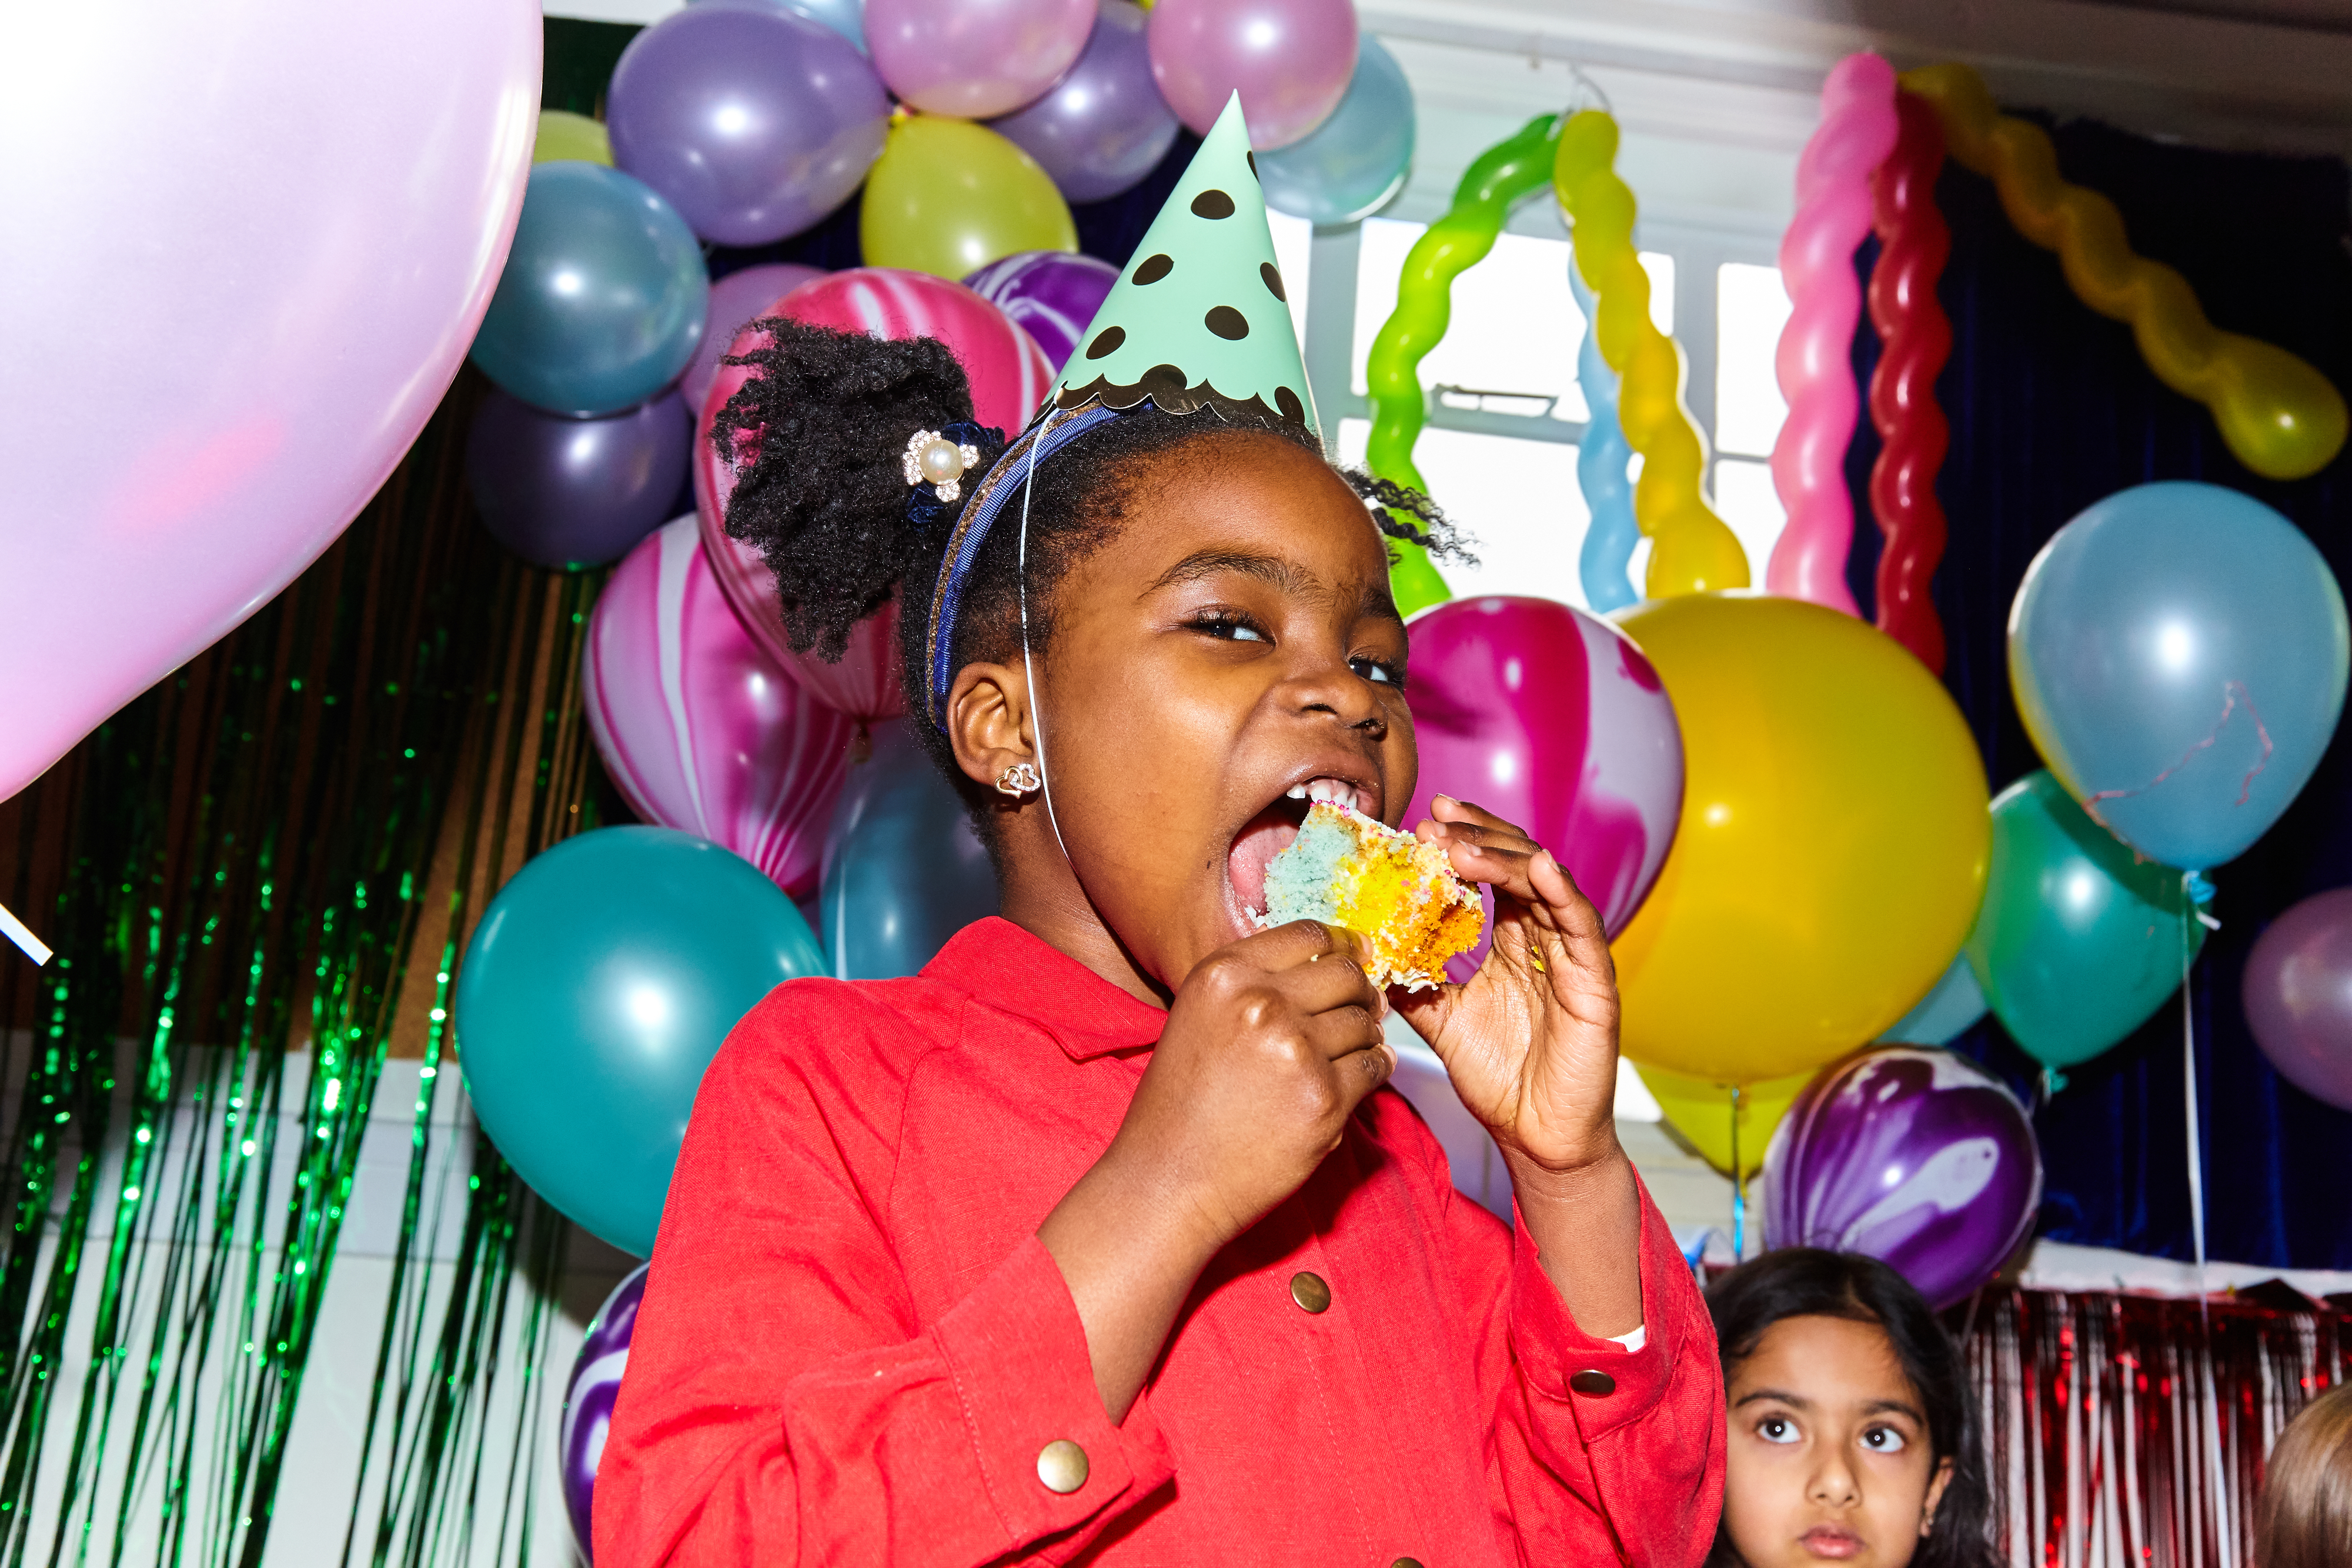 A girl in a party hat enjoys cake at a festive birthday celebration with balloons in the background